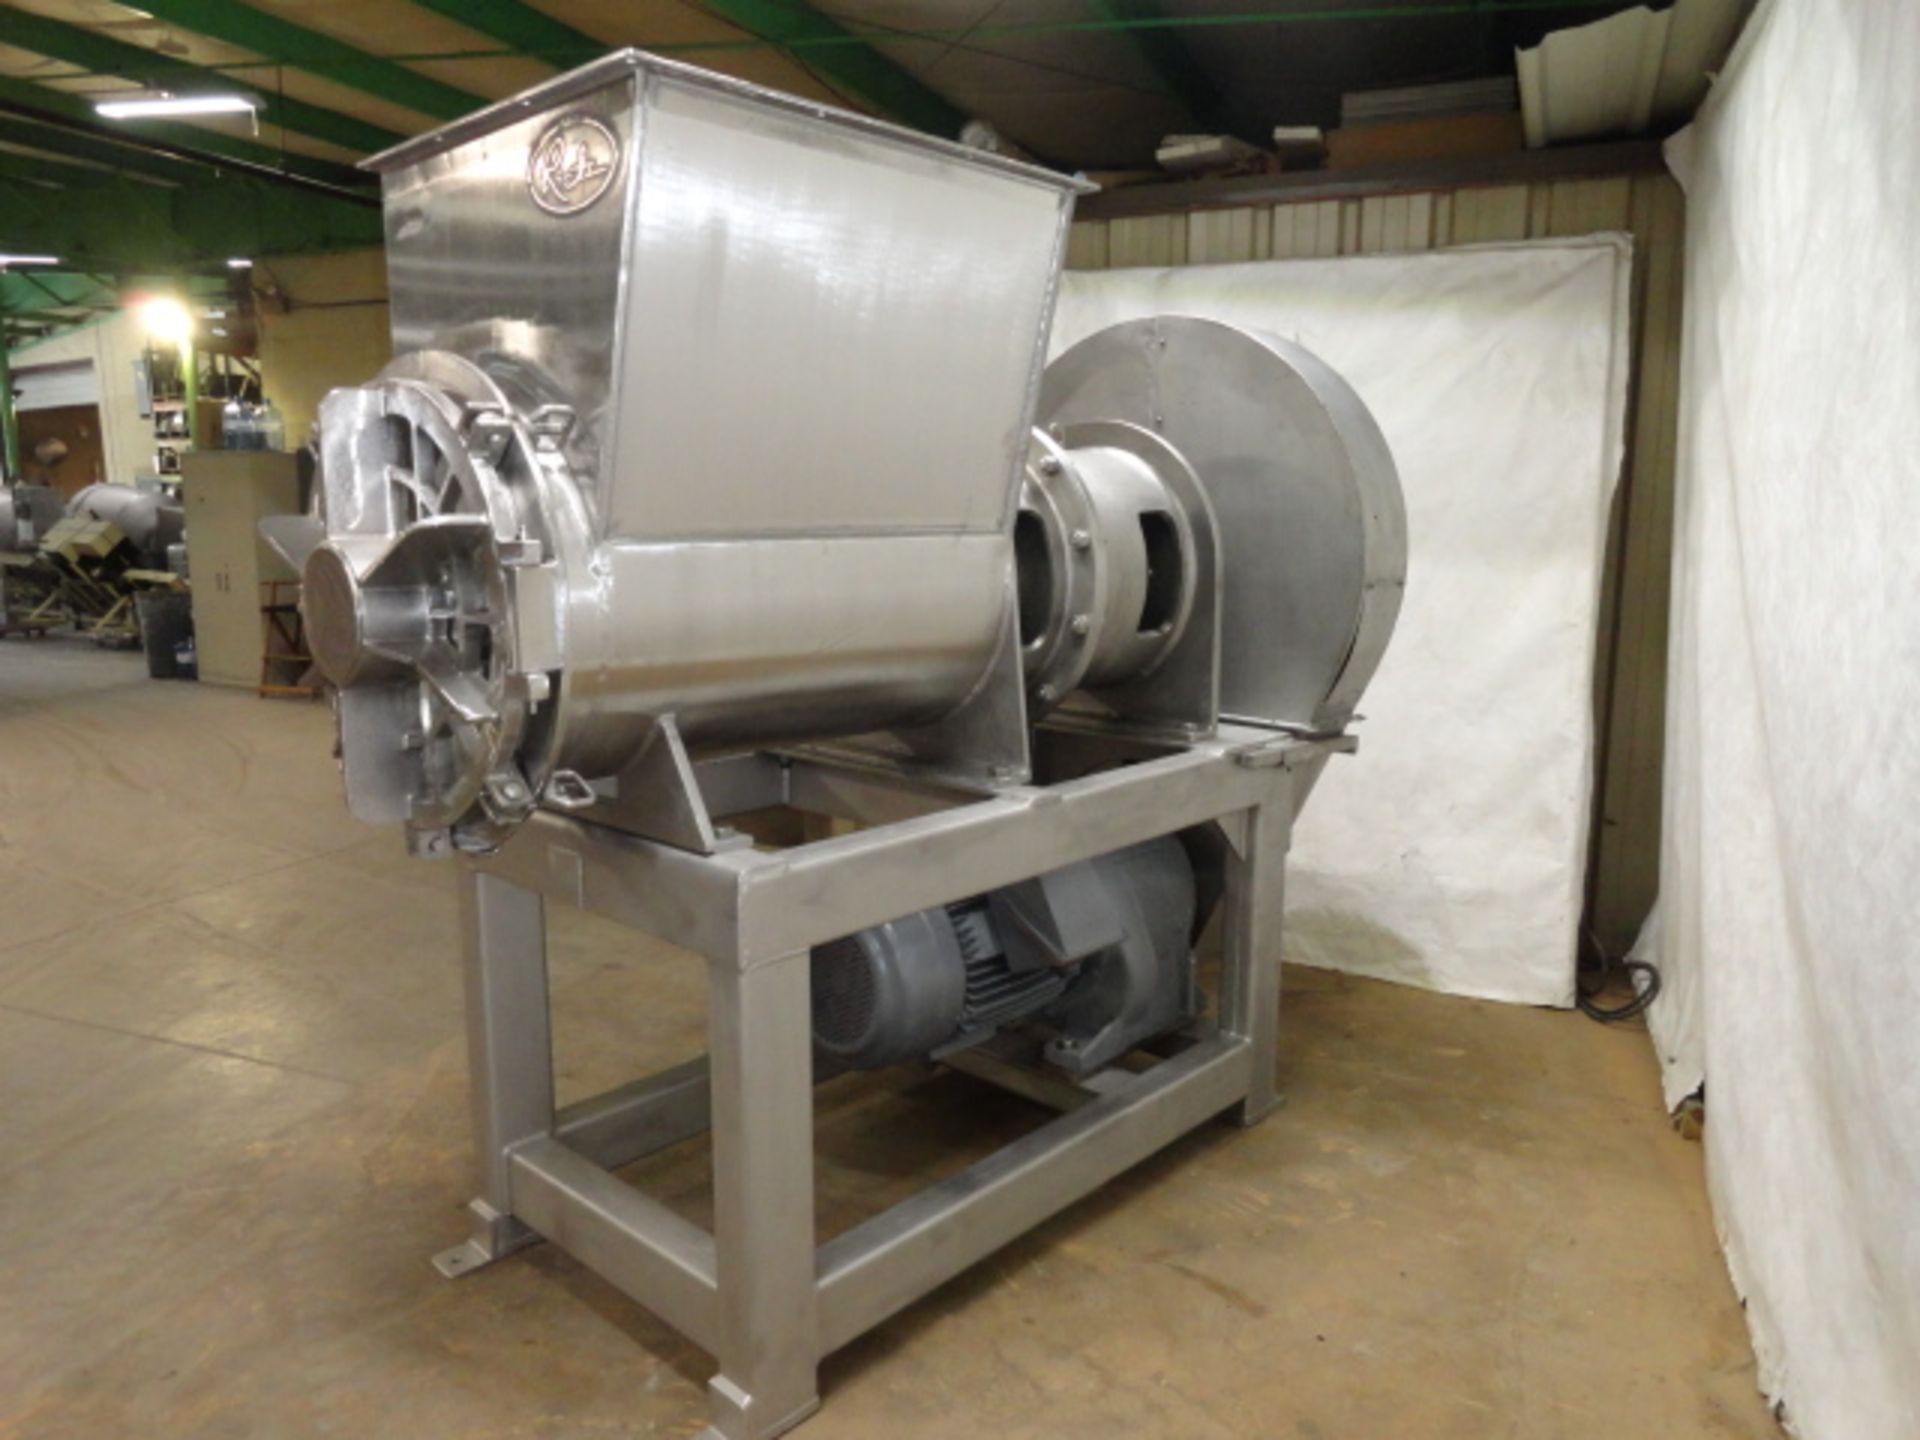 Reitz Rebuilt S/S Extructor, Model RE-24, Designed for Crushing and Grinding Large Frozen Blocks - Image 5 of 6